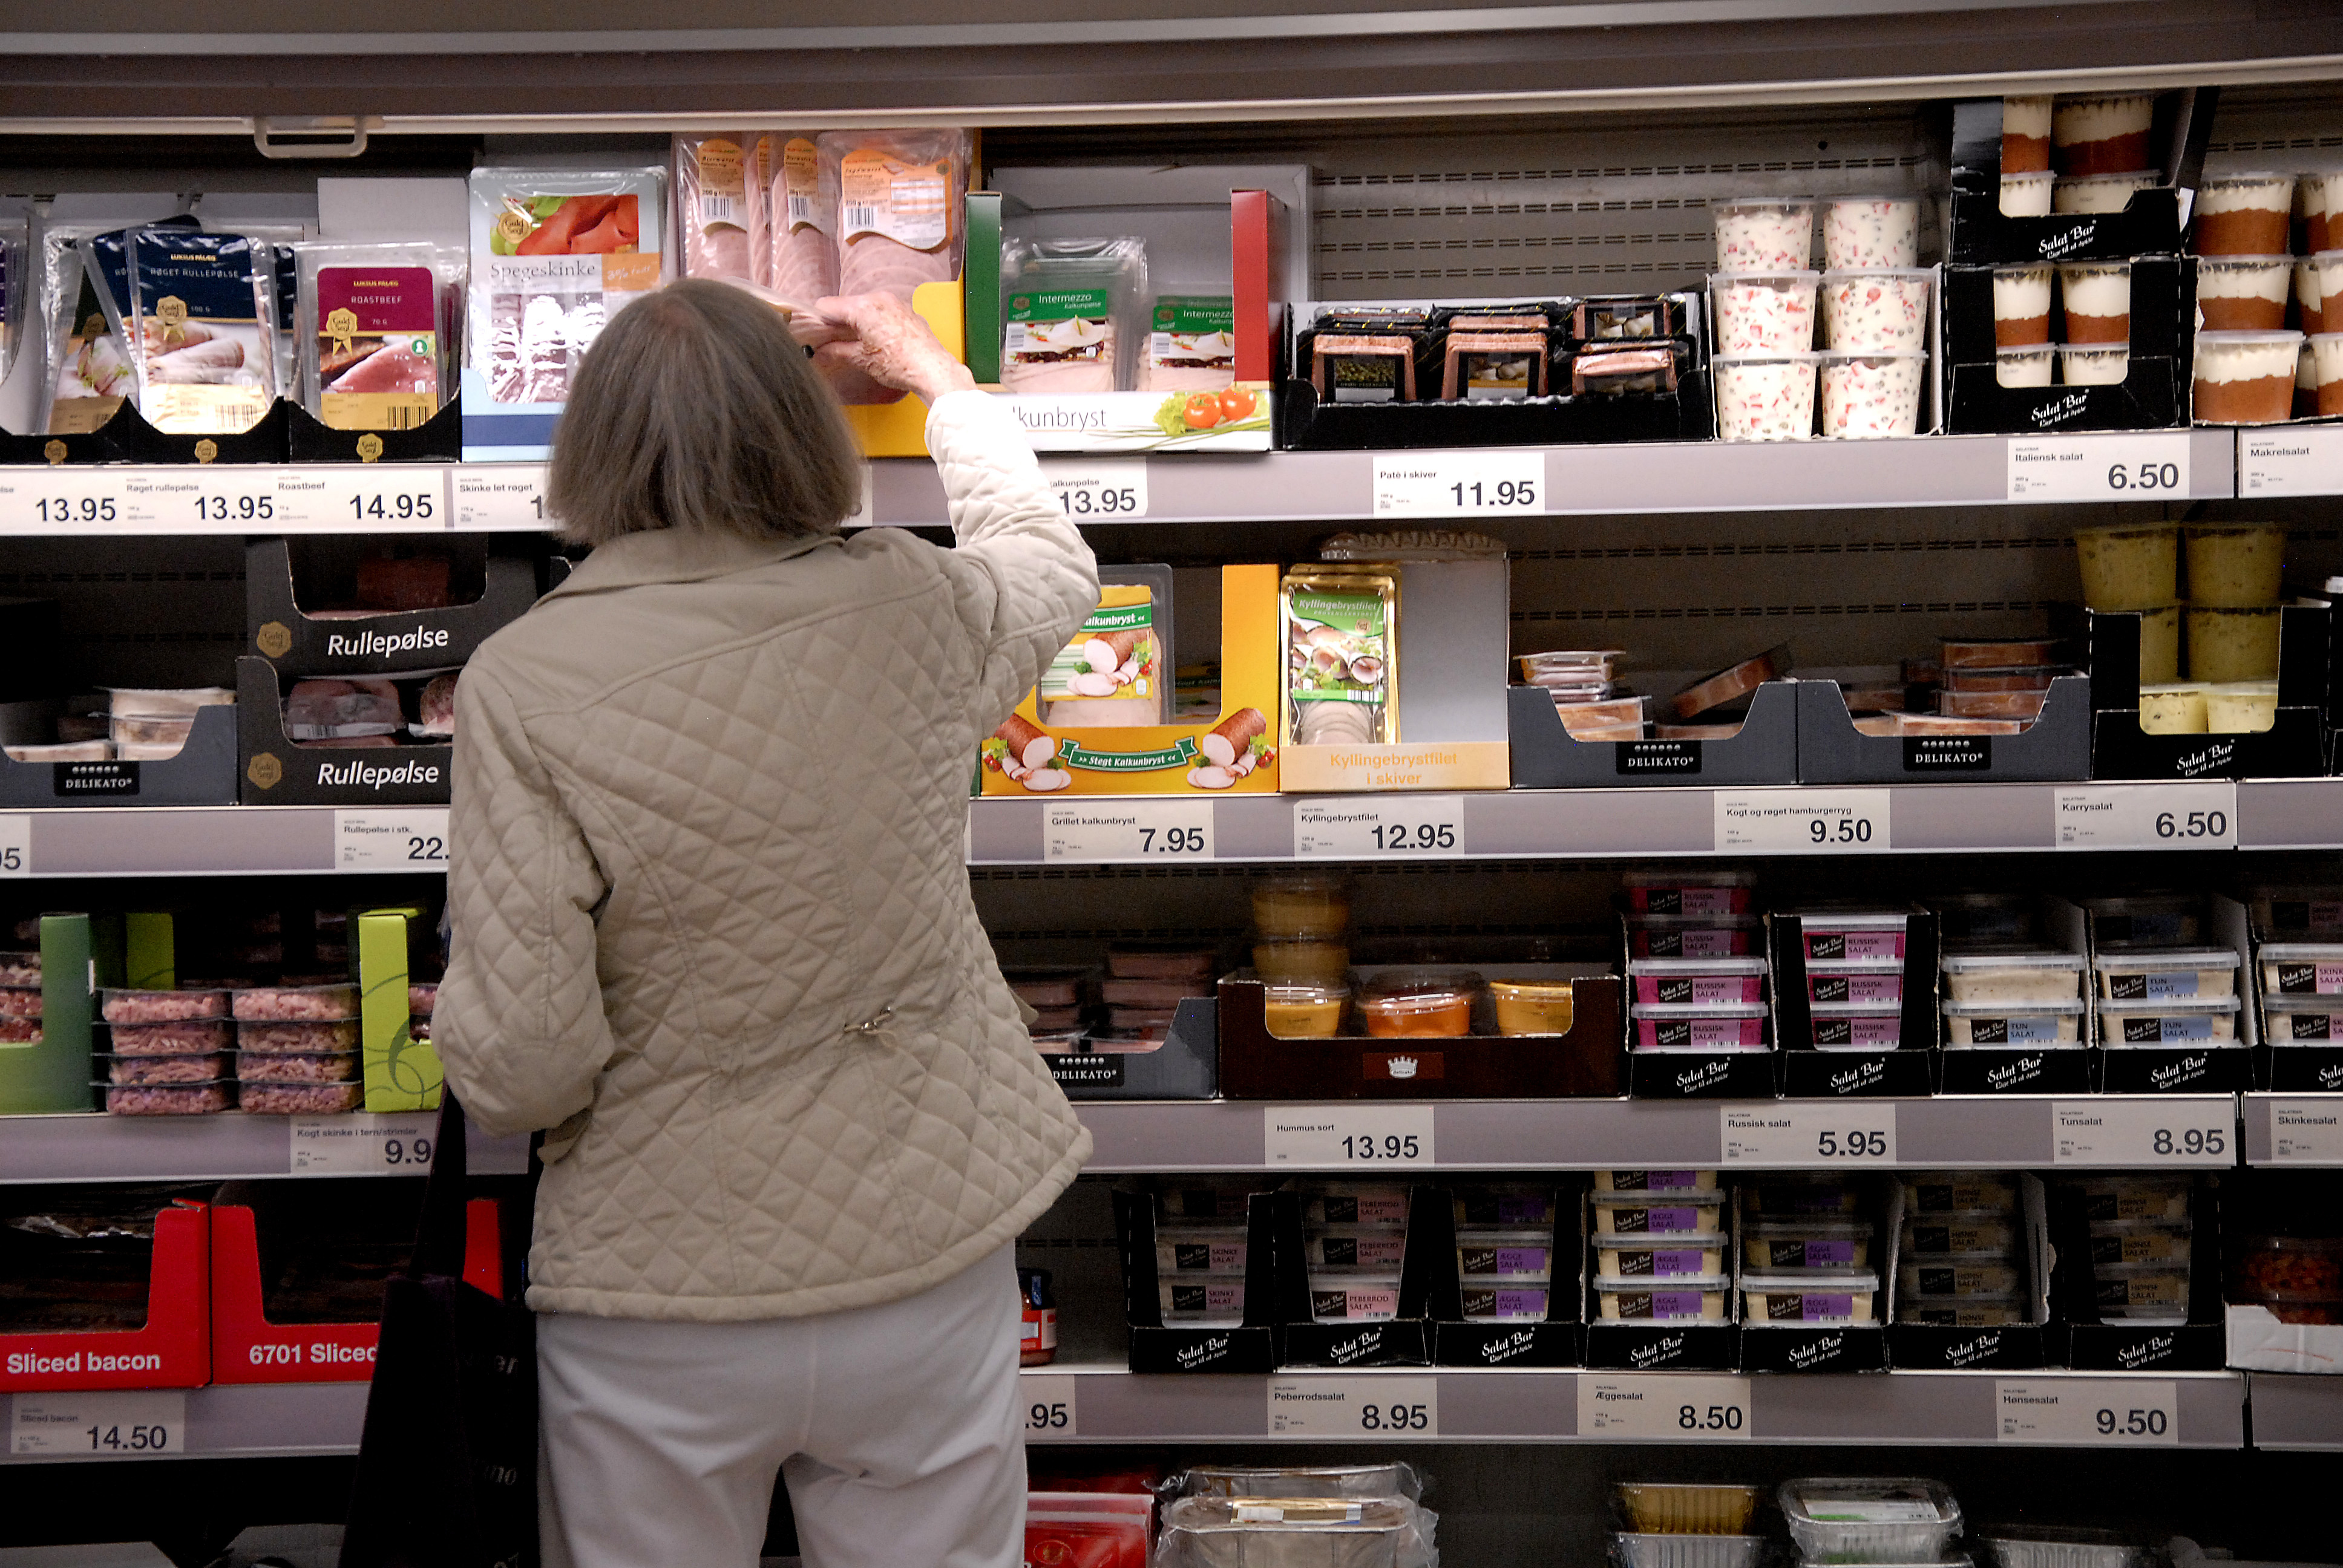 A shopper browses at a grocery store in Copenhagen, Denmark on July 19, 2015. (Francis Dean—Corbis/ Getty Images)